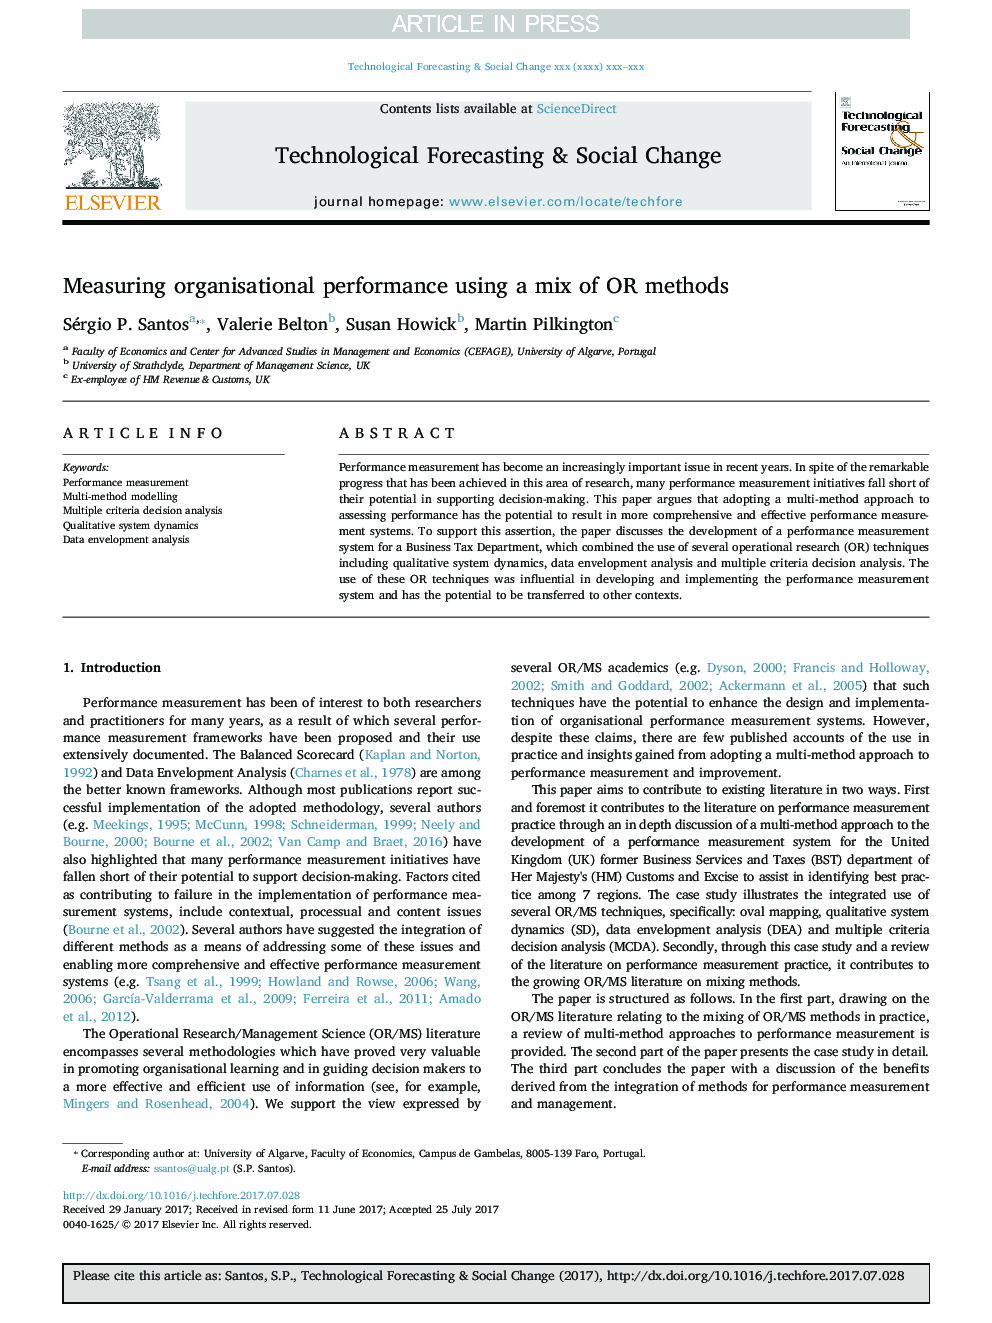 Measuring organisational performance using a mix of OR methods